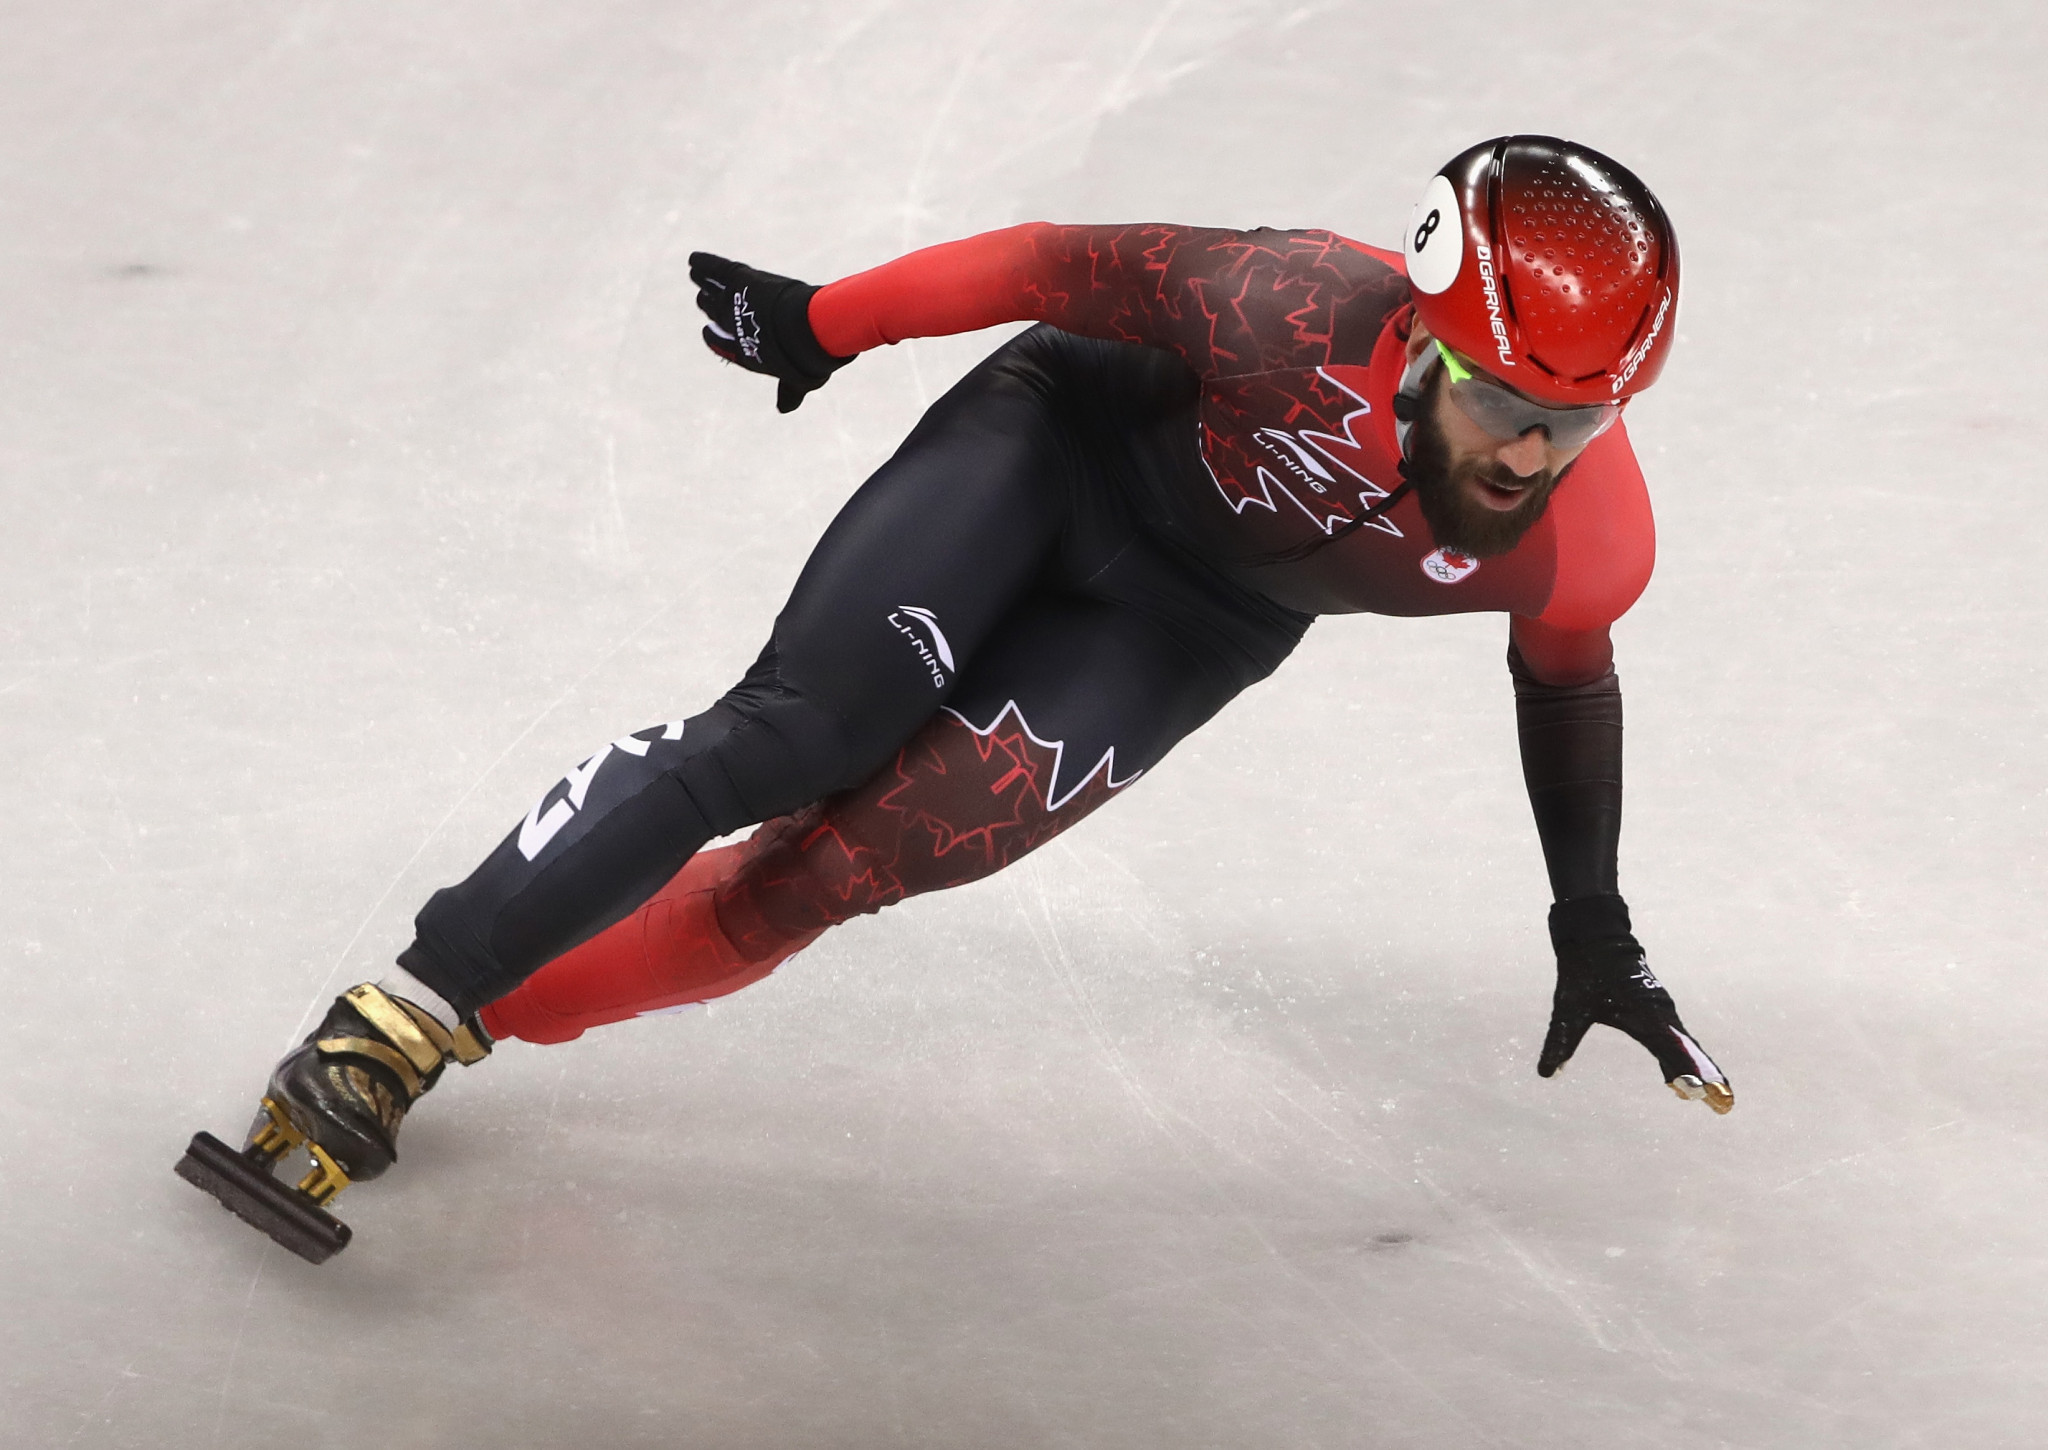 The World Short Track Speed Skating Championships in Montreal will be the final event of Charles Hamelin's career ©Getty Images